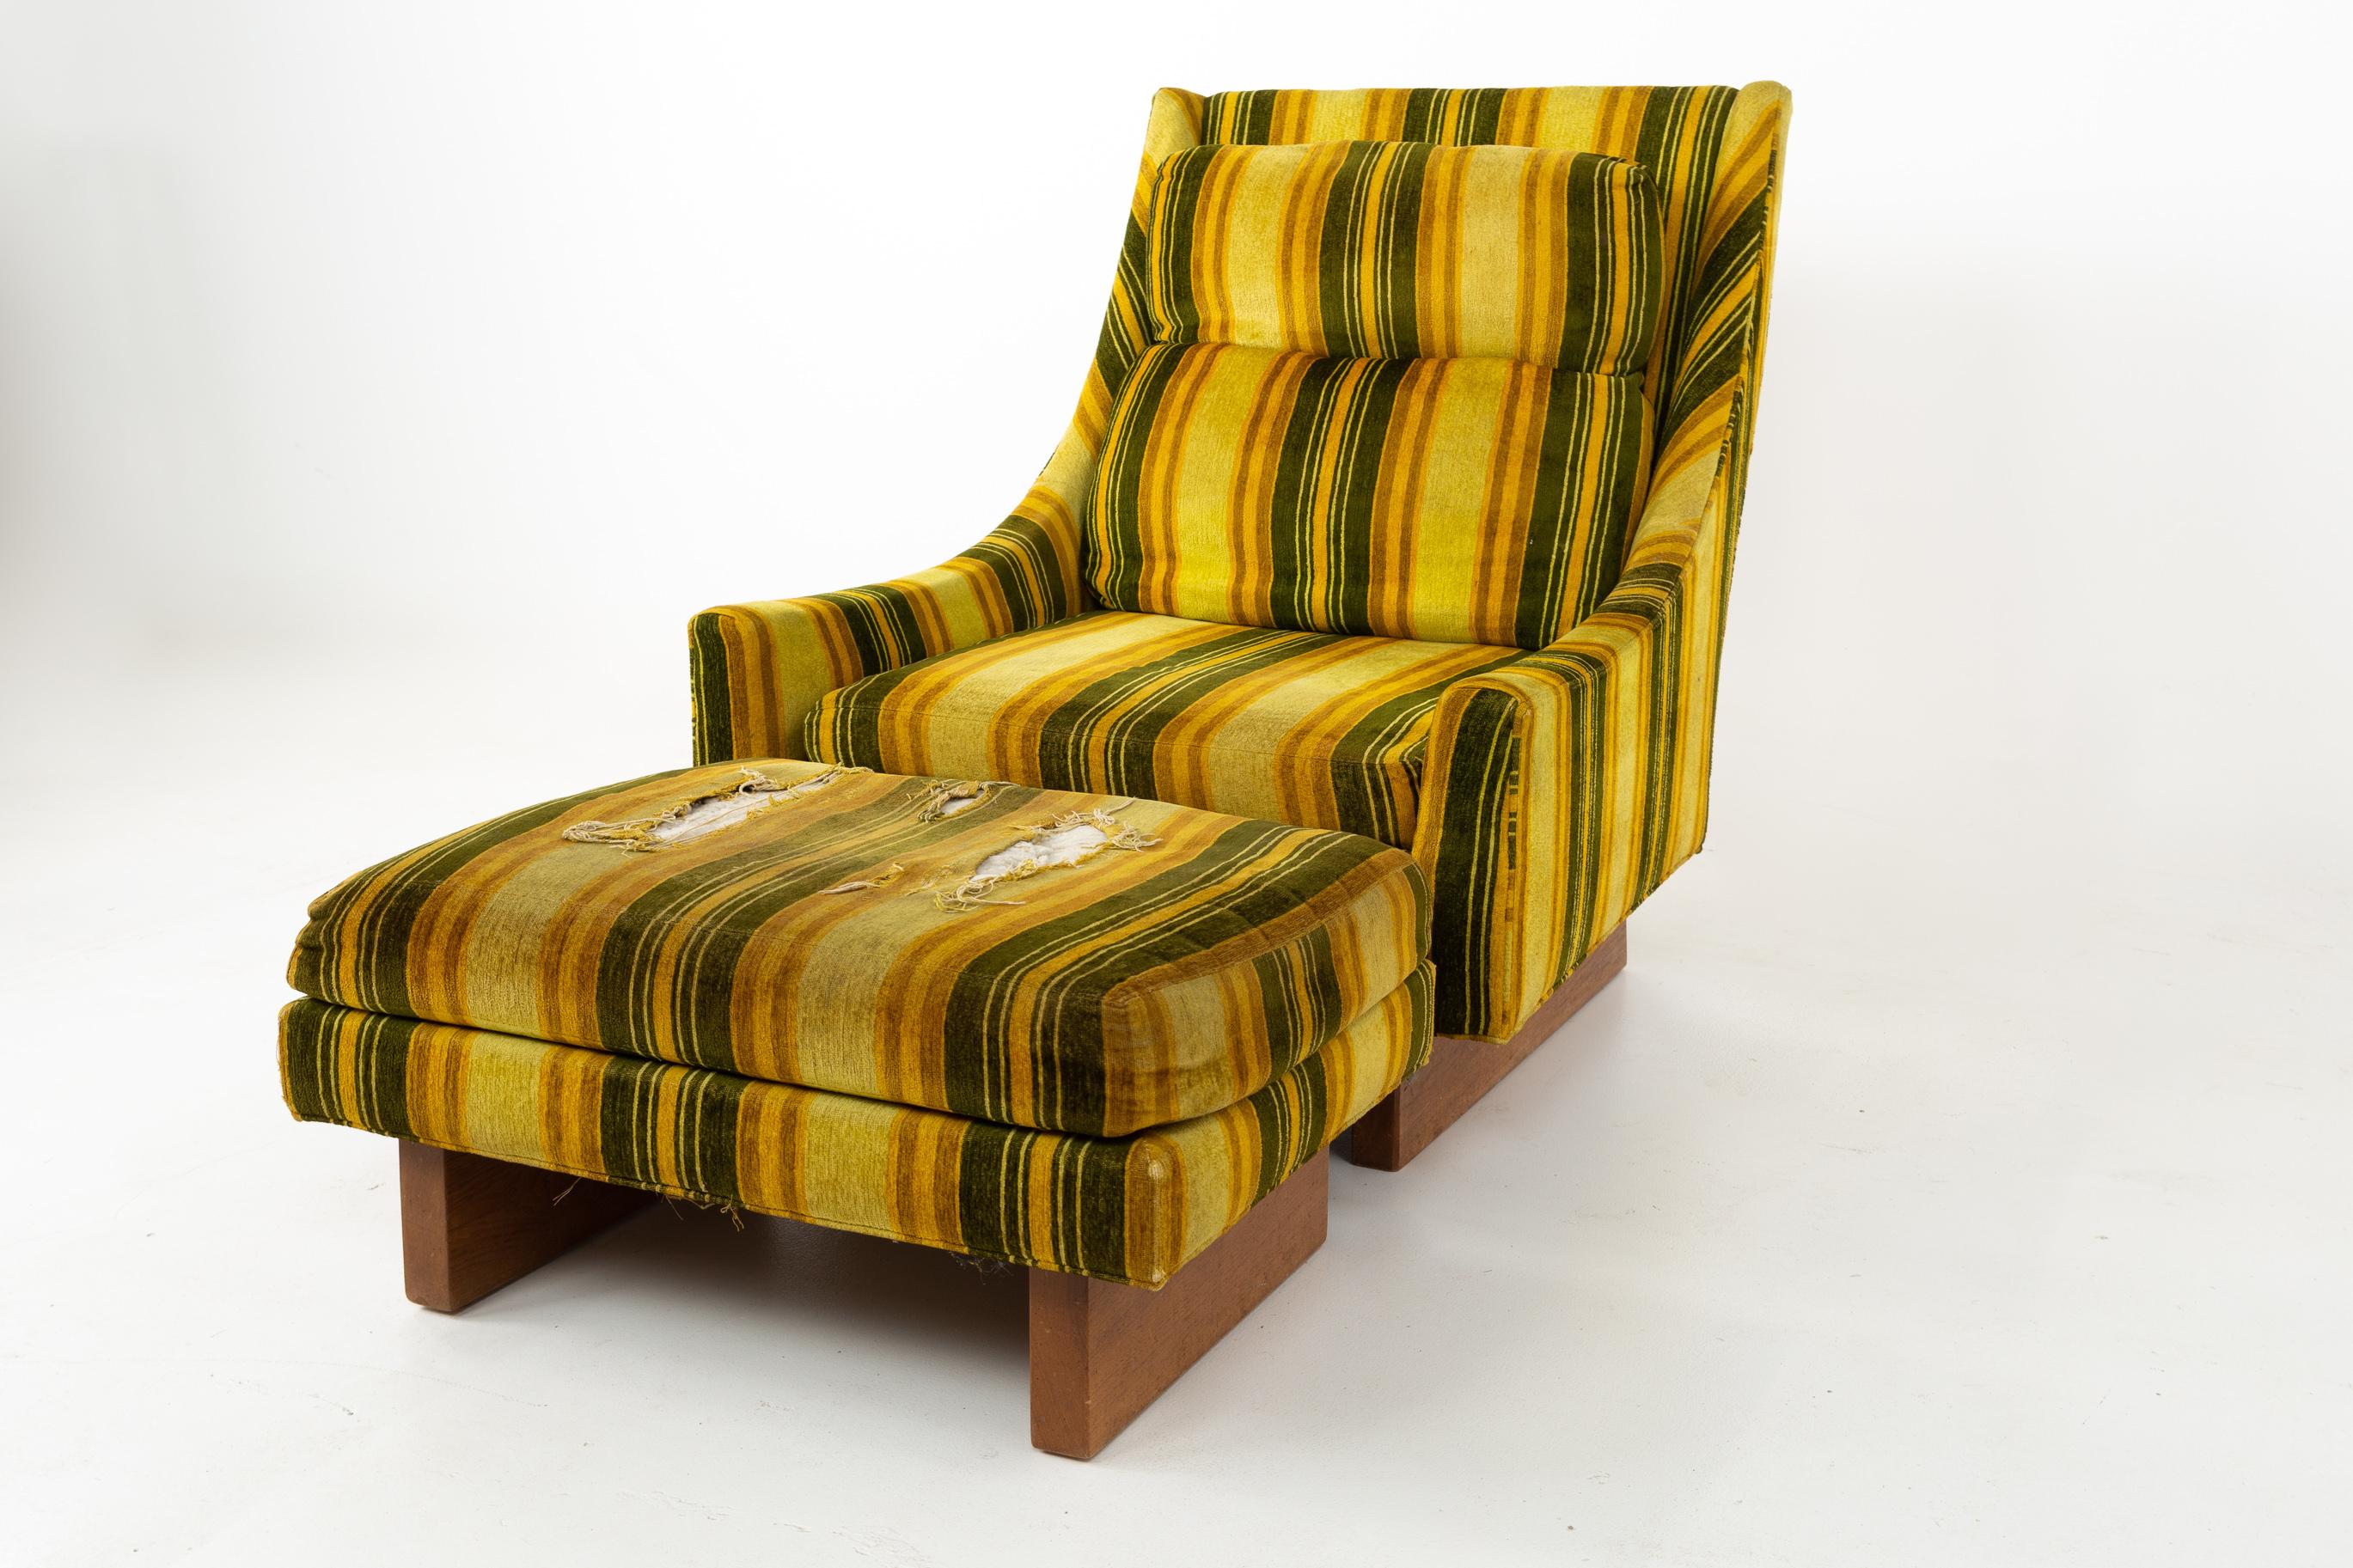 Adrian Pearsall style mid century walnut sleigh leg lounge chair and ottoman
This chair is 31.5 wide x 37.25 deep x 37 inches high, with a seat height of 14.25 and arm height of 17.25 inches

All pieces of furniture can be had in what we call